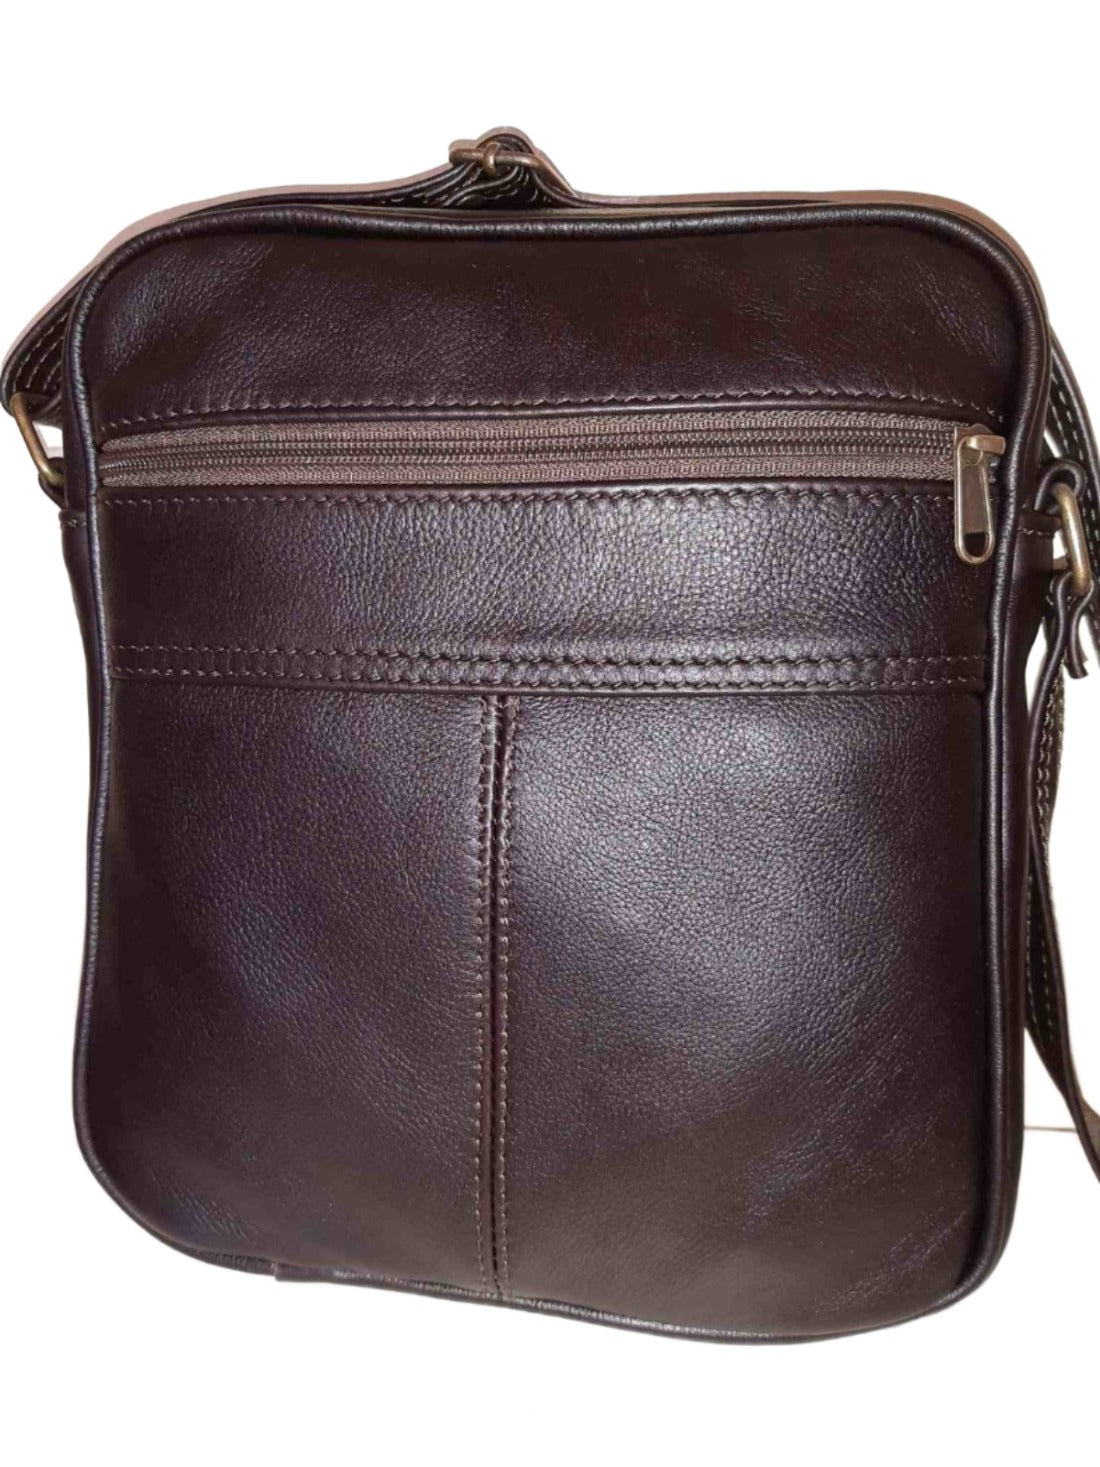 Men's Messenger bag in dark brown colour made by  cape Masai Leather